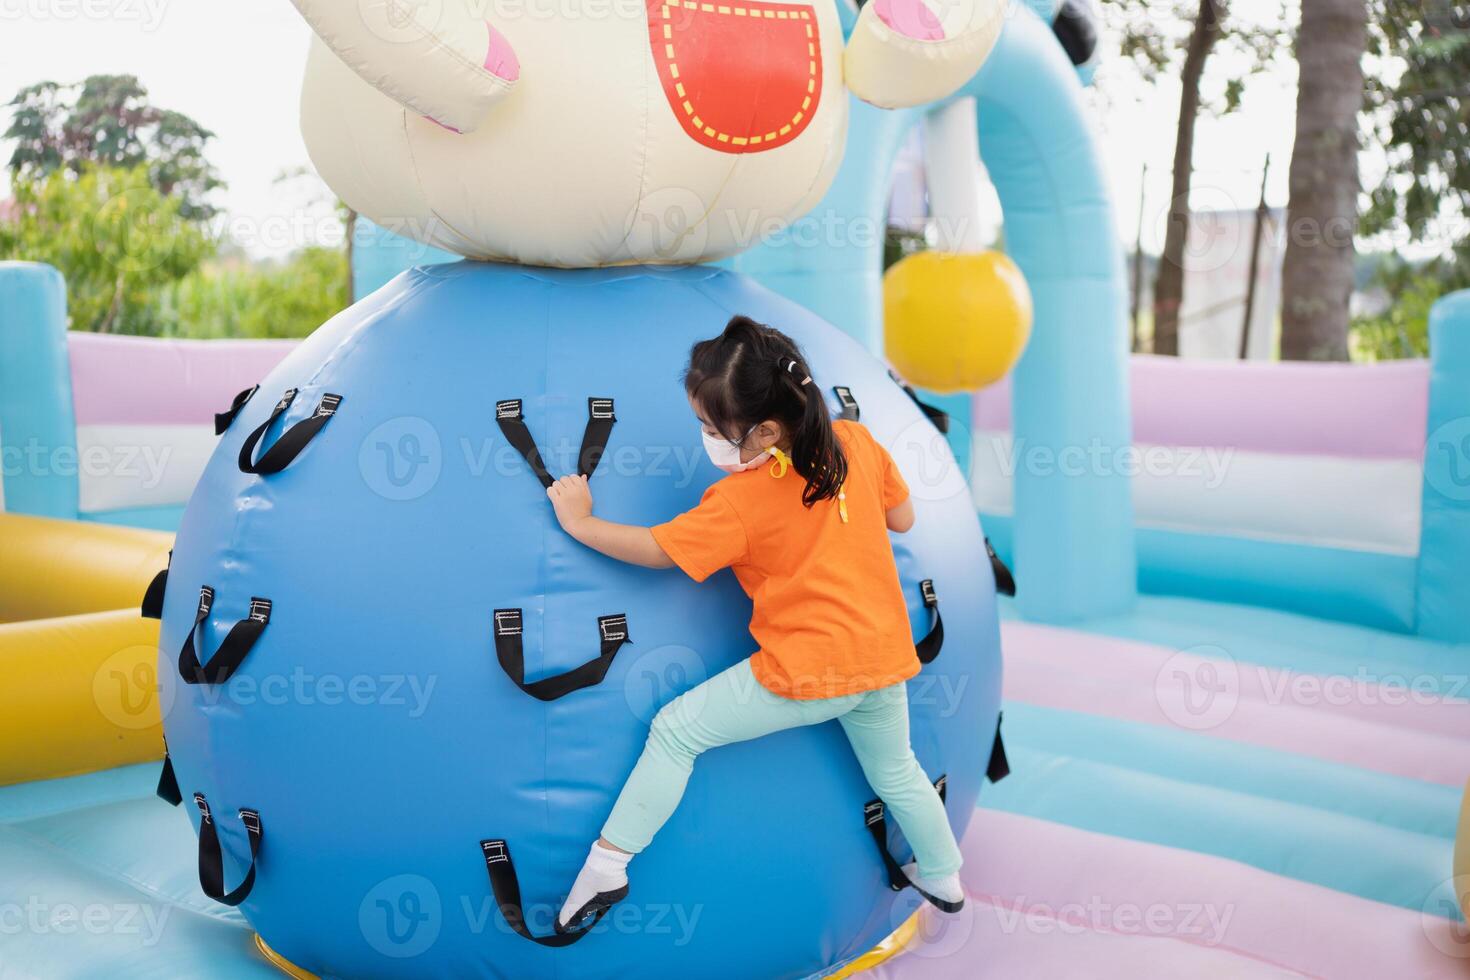 A little girl is climbing a blue inflatable obstacle. The obstacle is blue and has a yellow and pink section photo